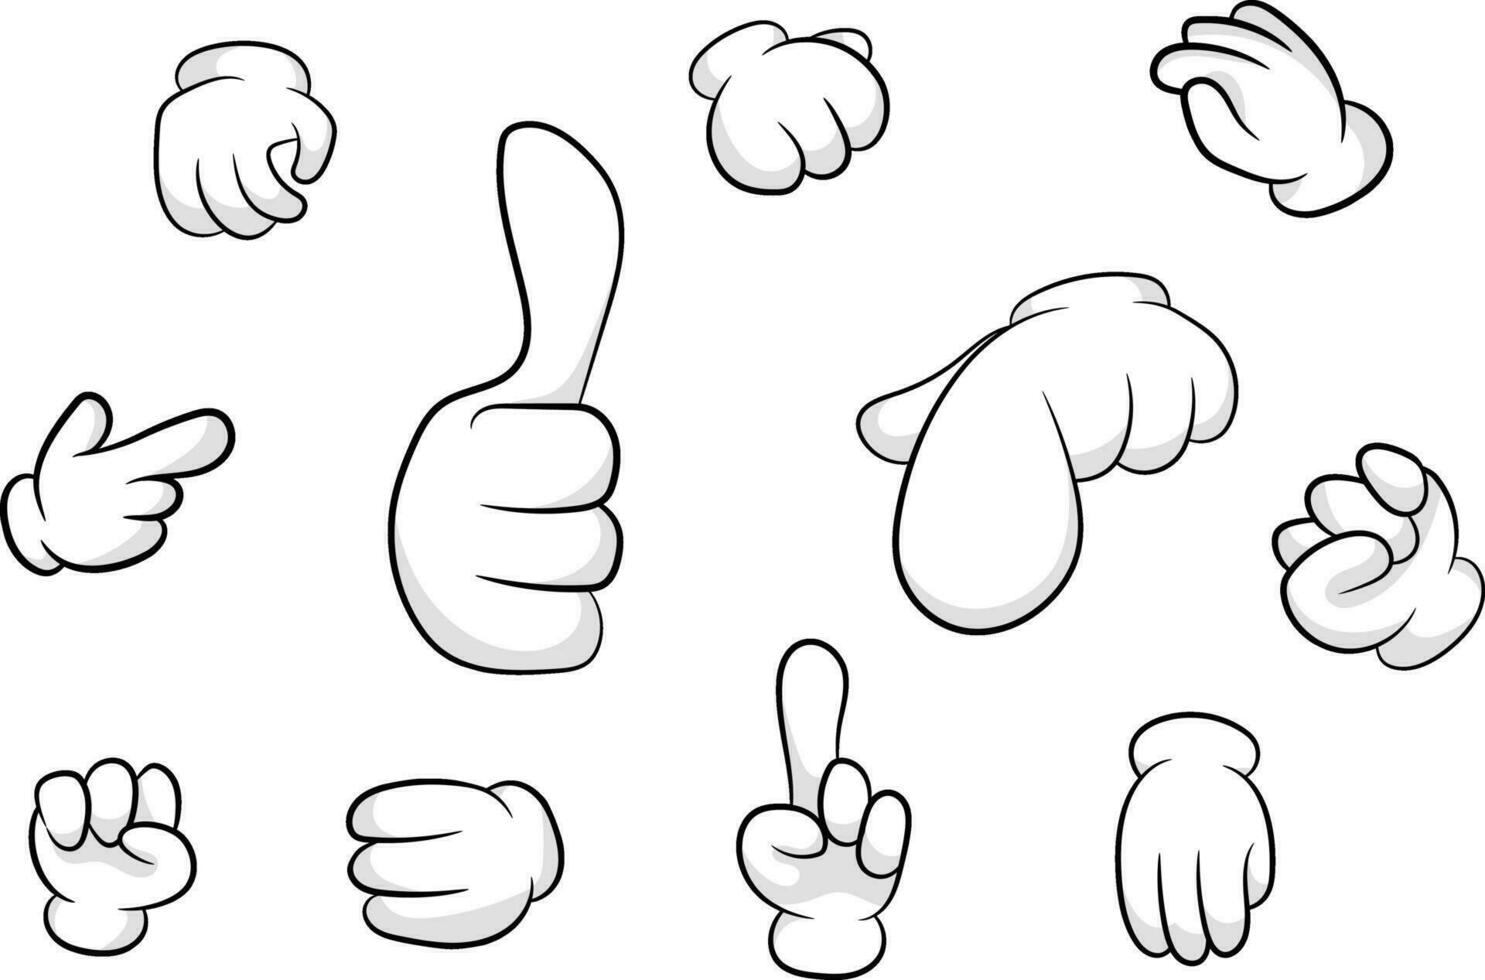 Different hand angles palm gestures cartoon style template vector